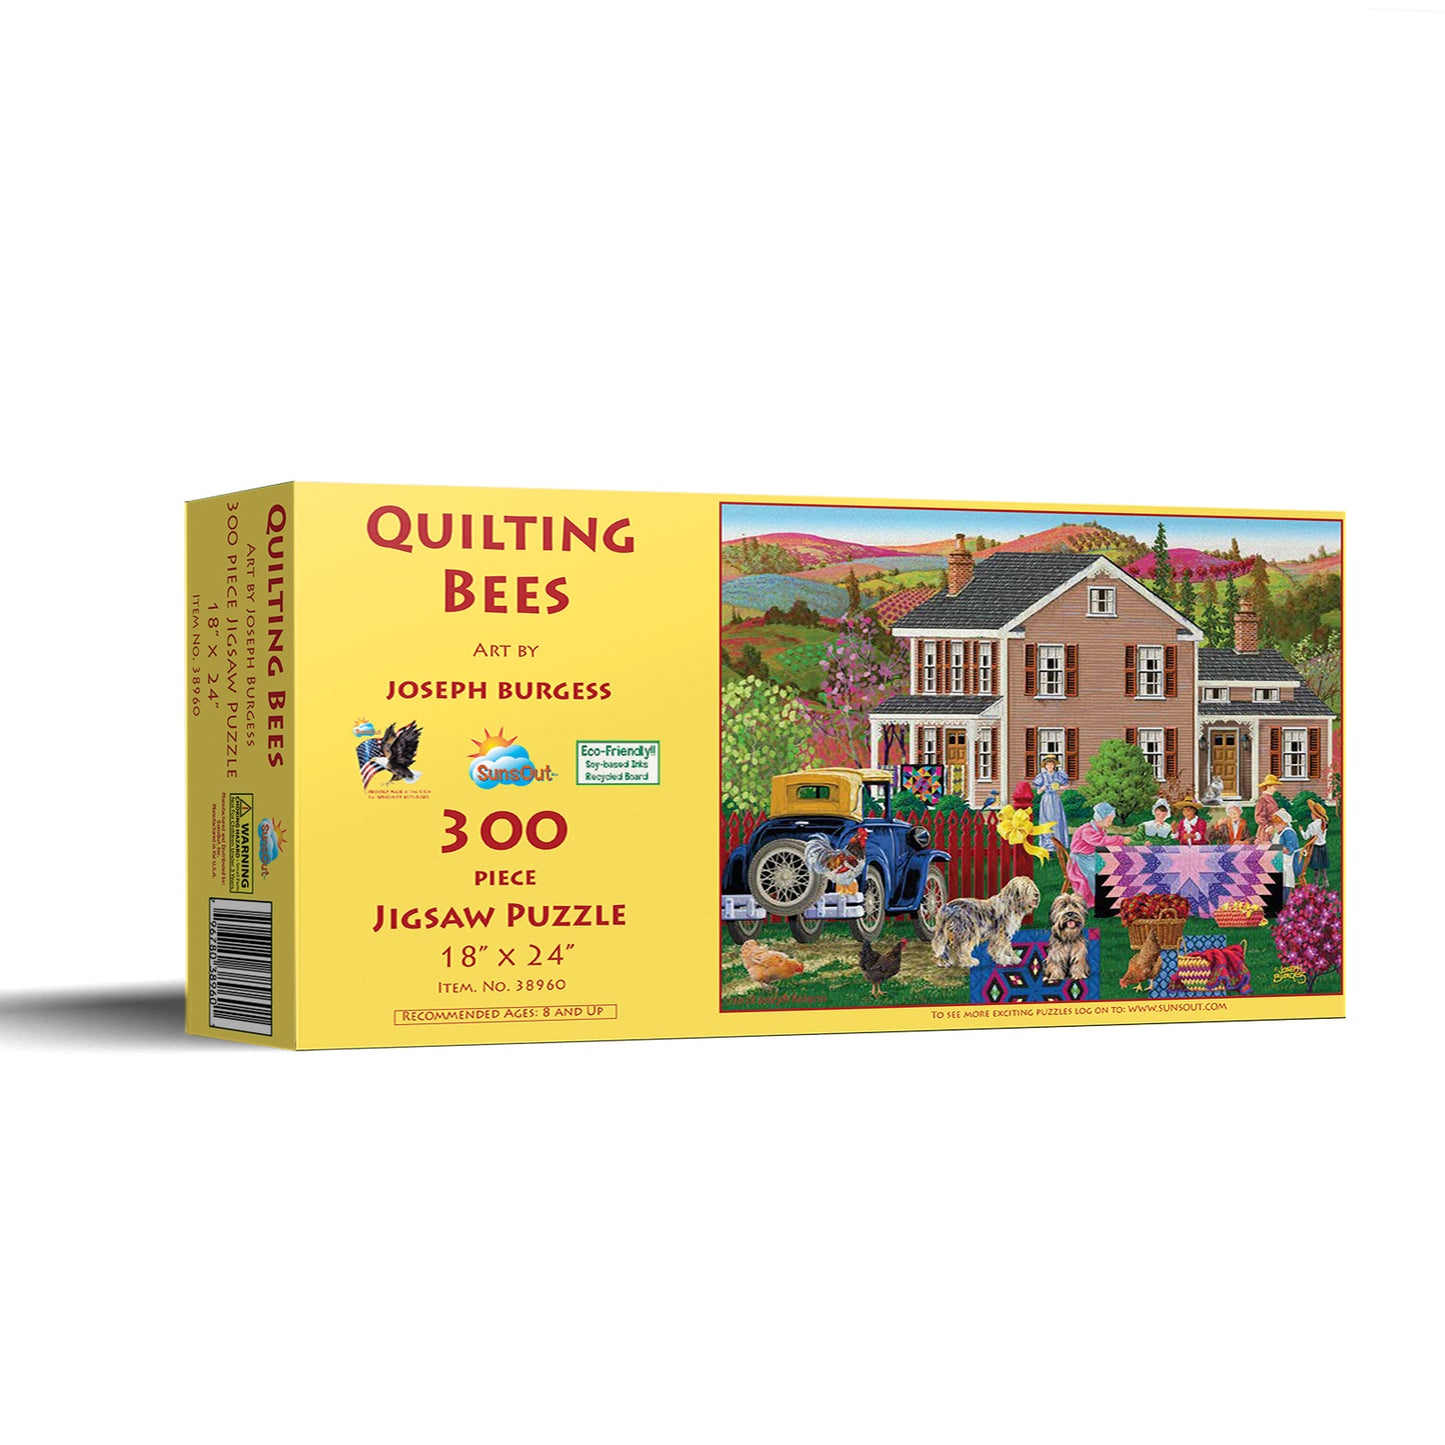 Quilting Bees - 300 Piece Jigsaw Puzzle